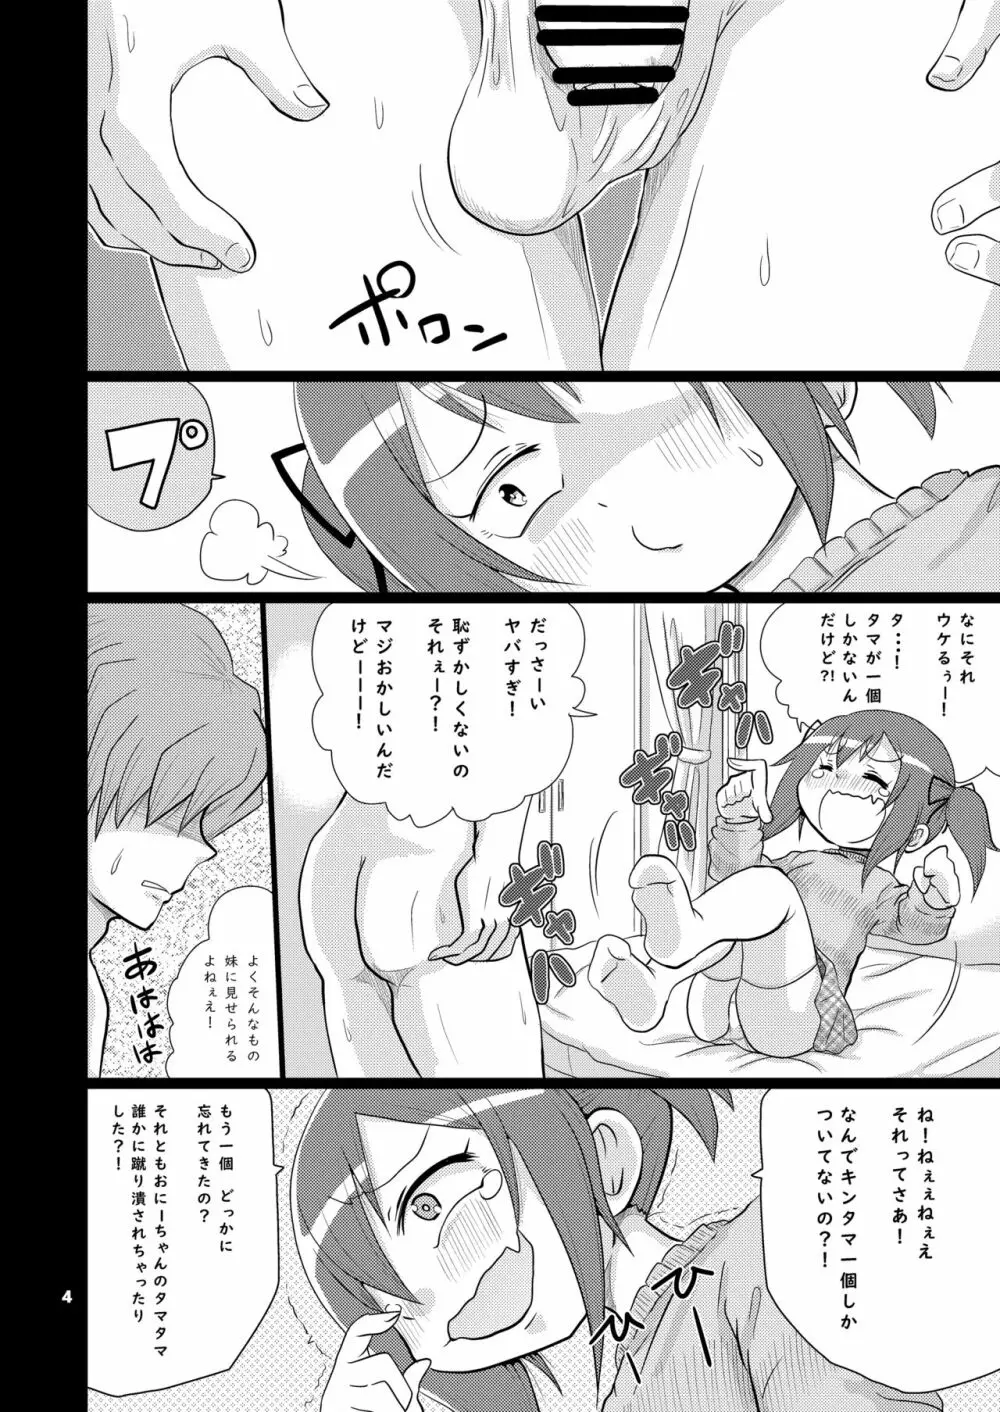 LOST BALL 残機1 Page.4